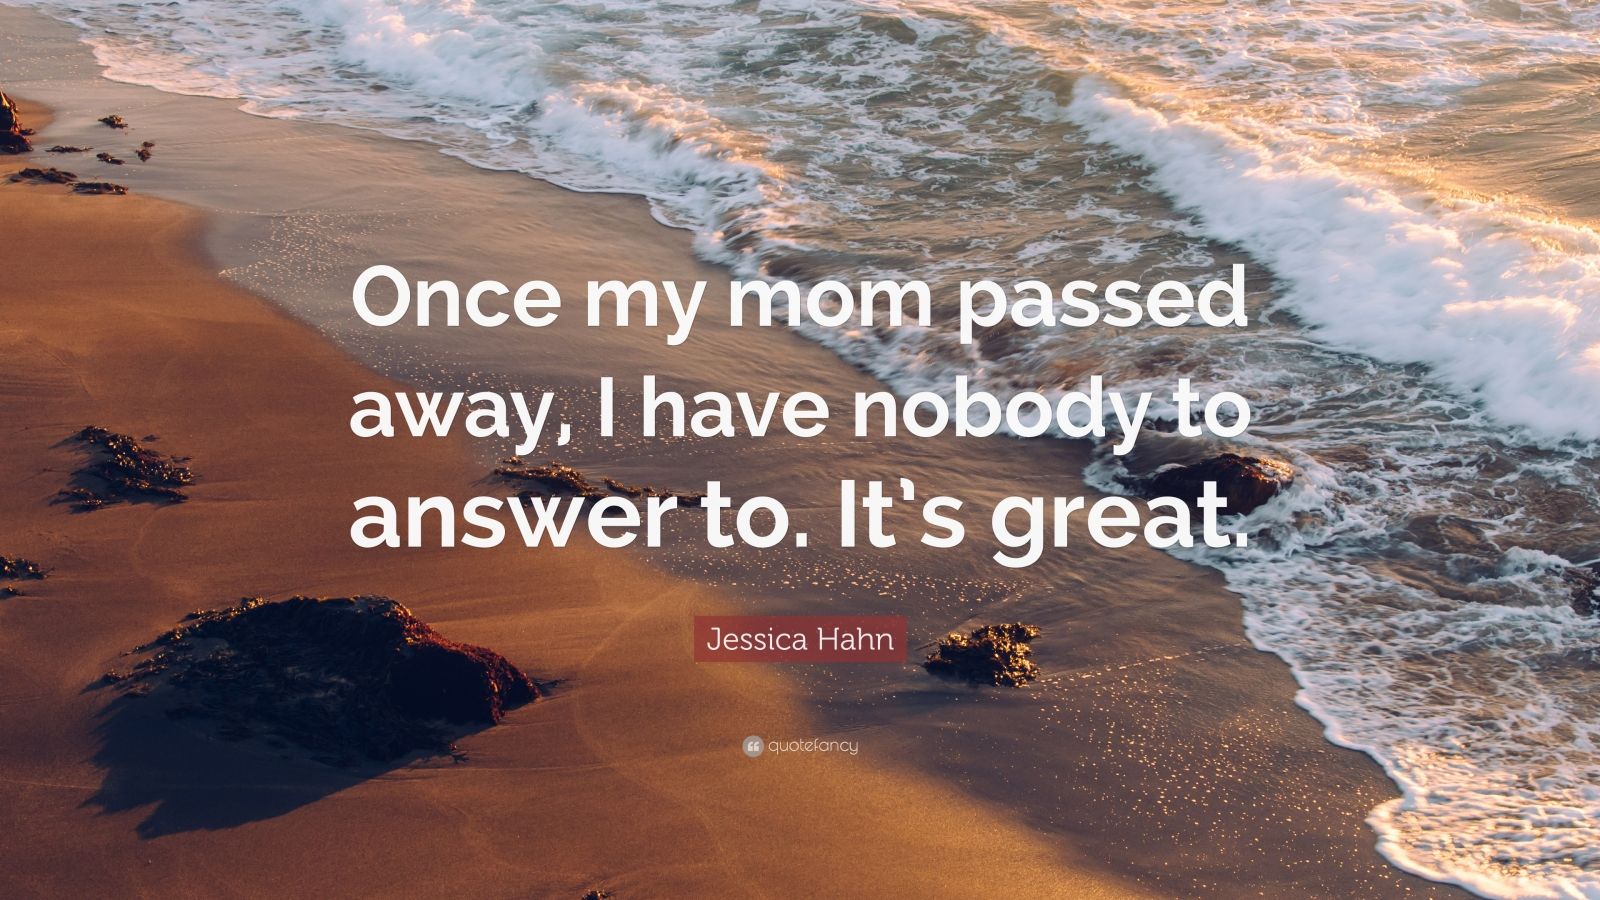 Jessica Hahn Quote “once My Mom Passed Away I Have Nobody To Answer